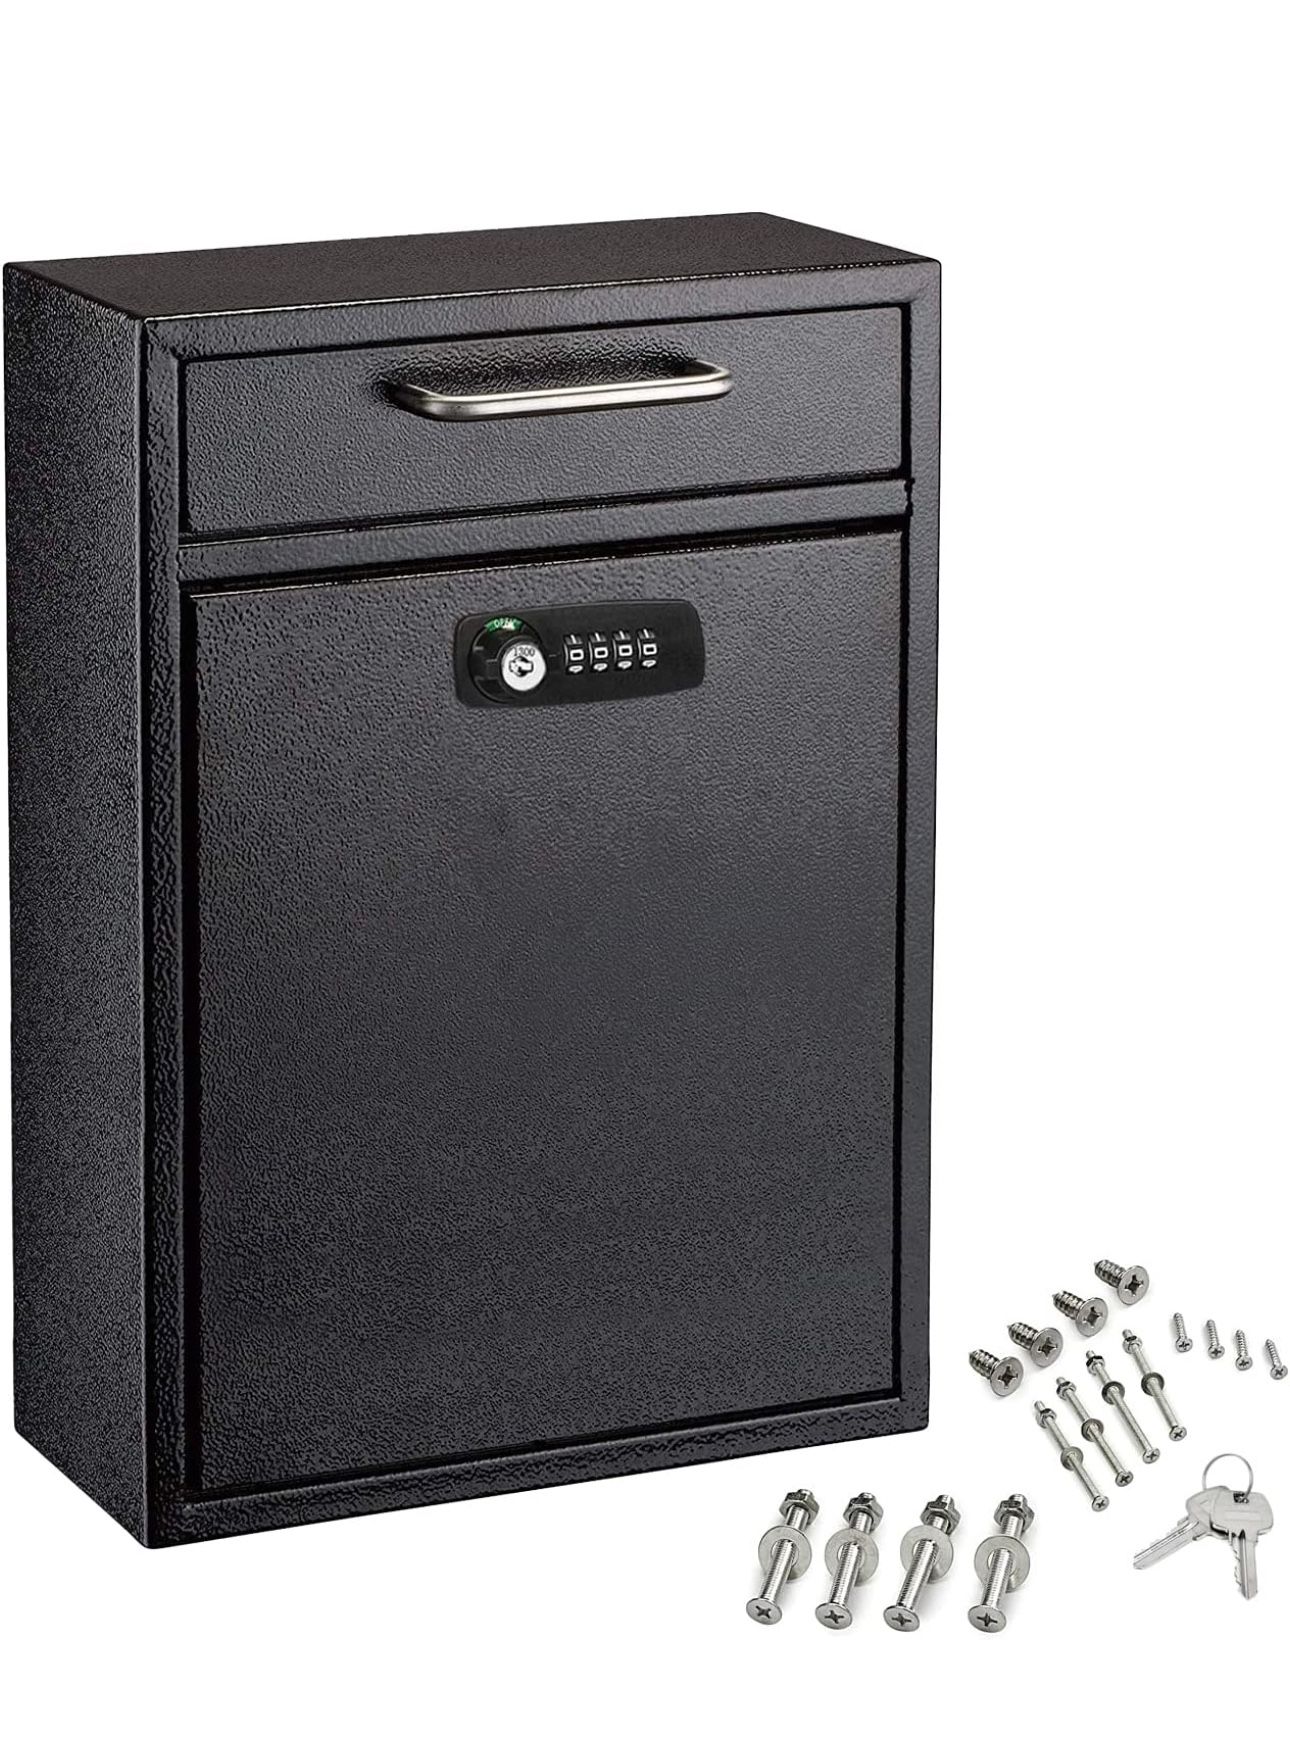 Adir Mailboxes with Combination Lock - Hanging Secure Lock Postbox, Cash Drop Box, Key Drop Off Box with Lock - Wall Mounted Mail box 16.8 x 11.22 x 4